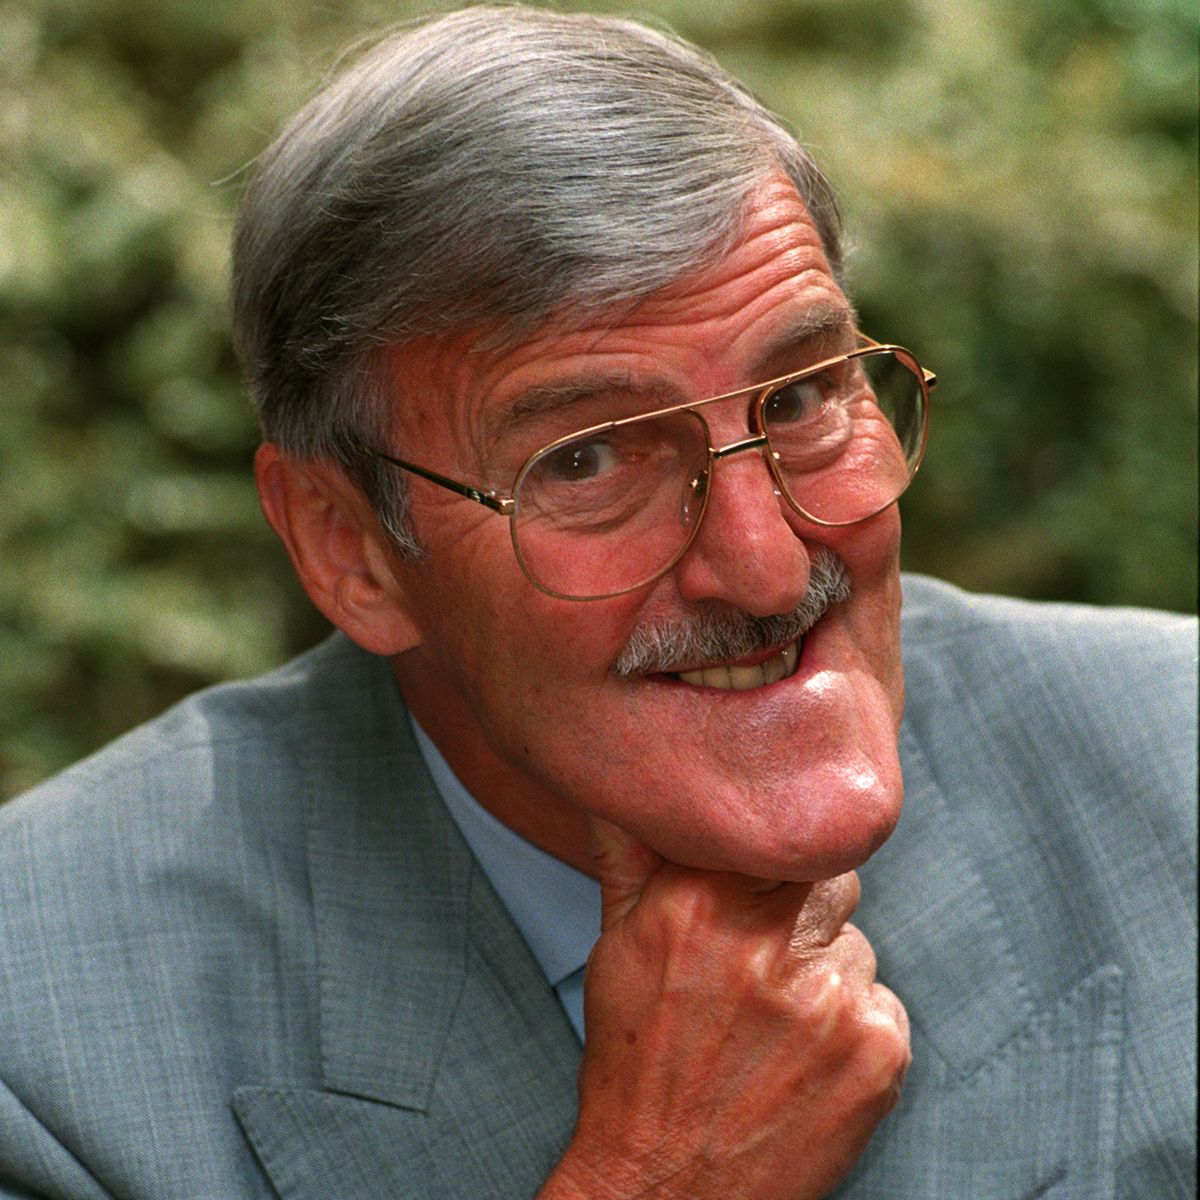 Jimmy Hill, the man with the big chin. Just for fun, Starball contained the Jimmy Hill chin bonus. 